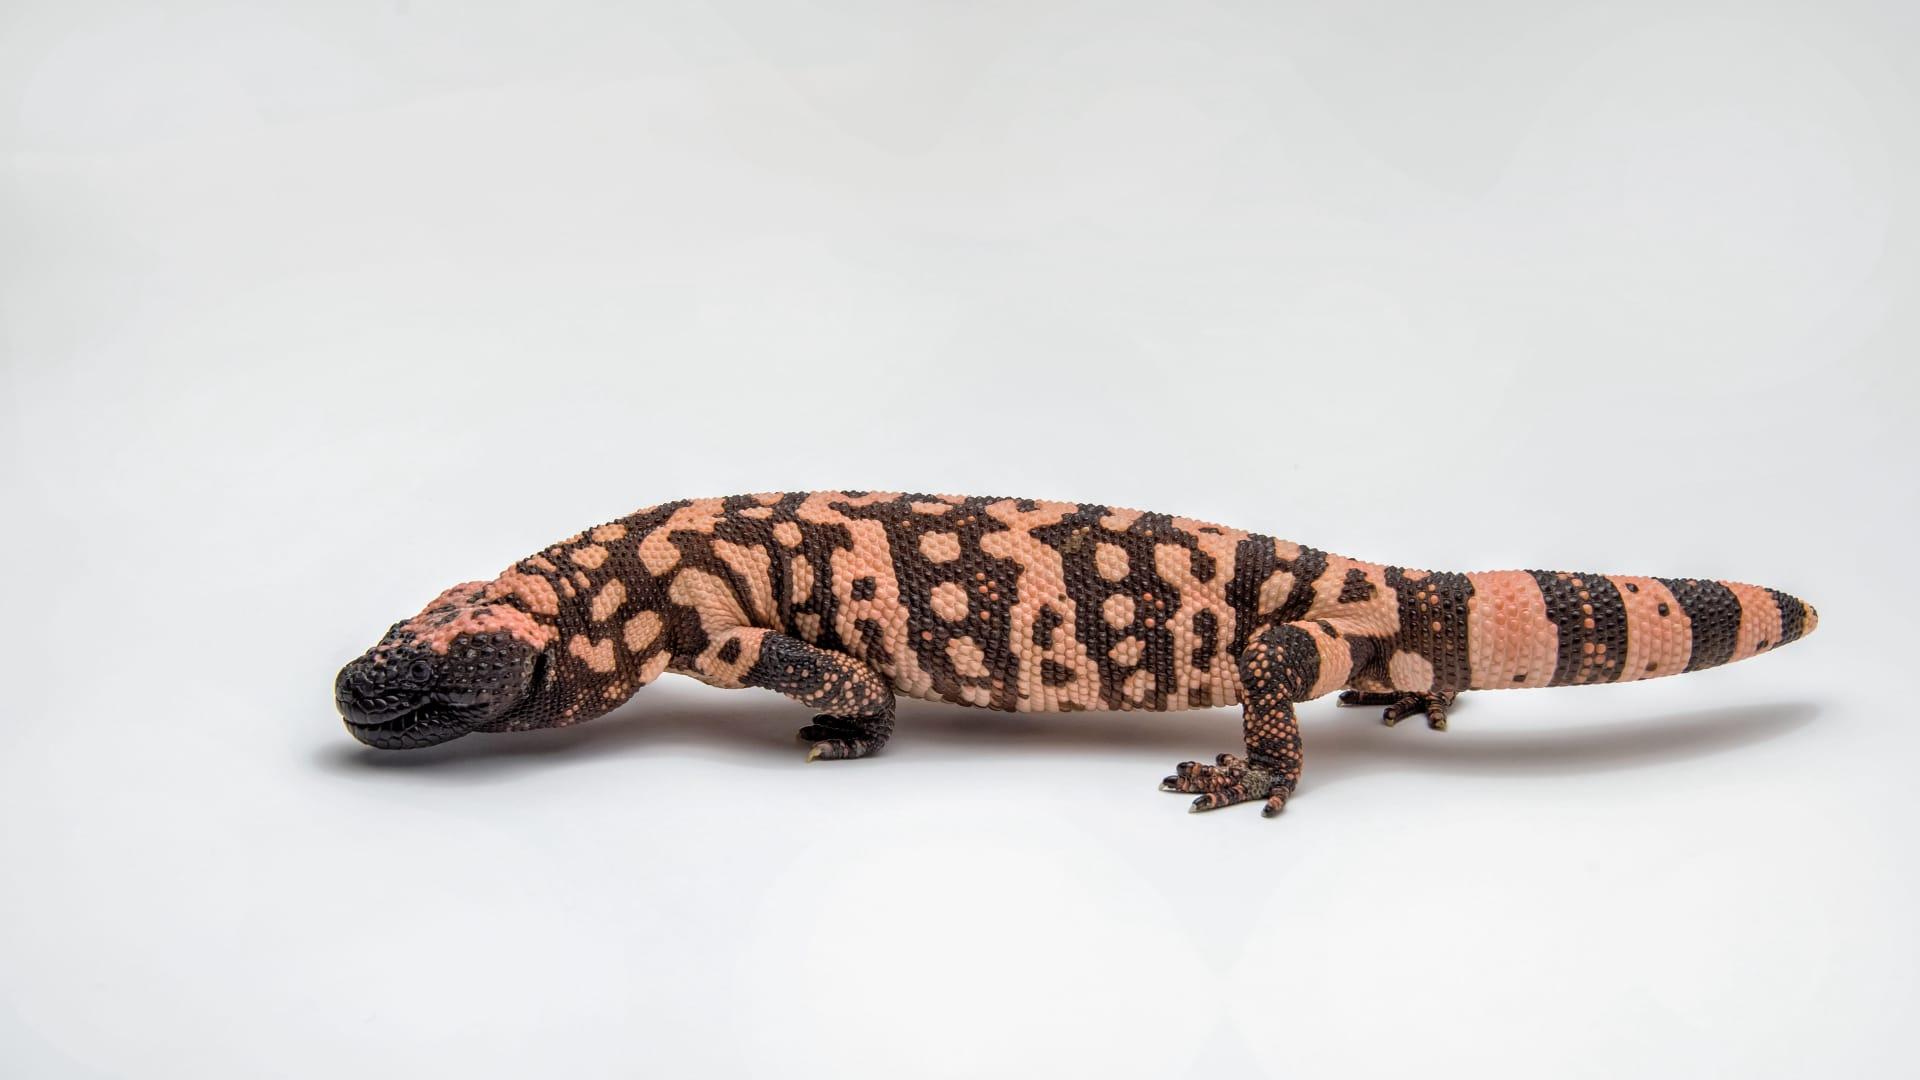 Mexican beaded lizard pictures